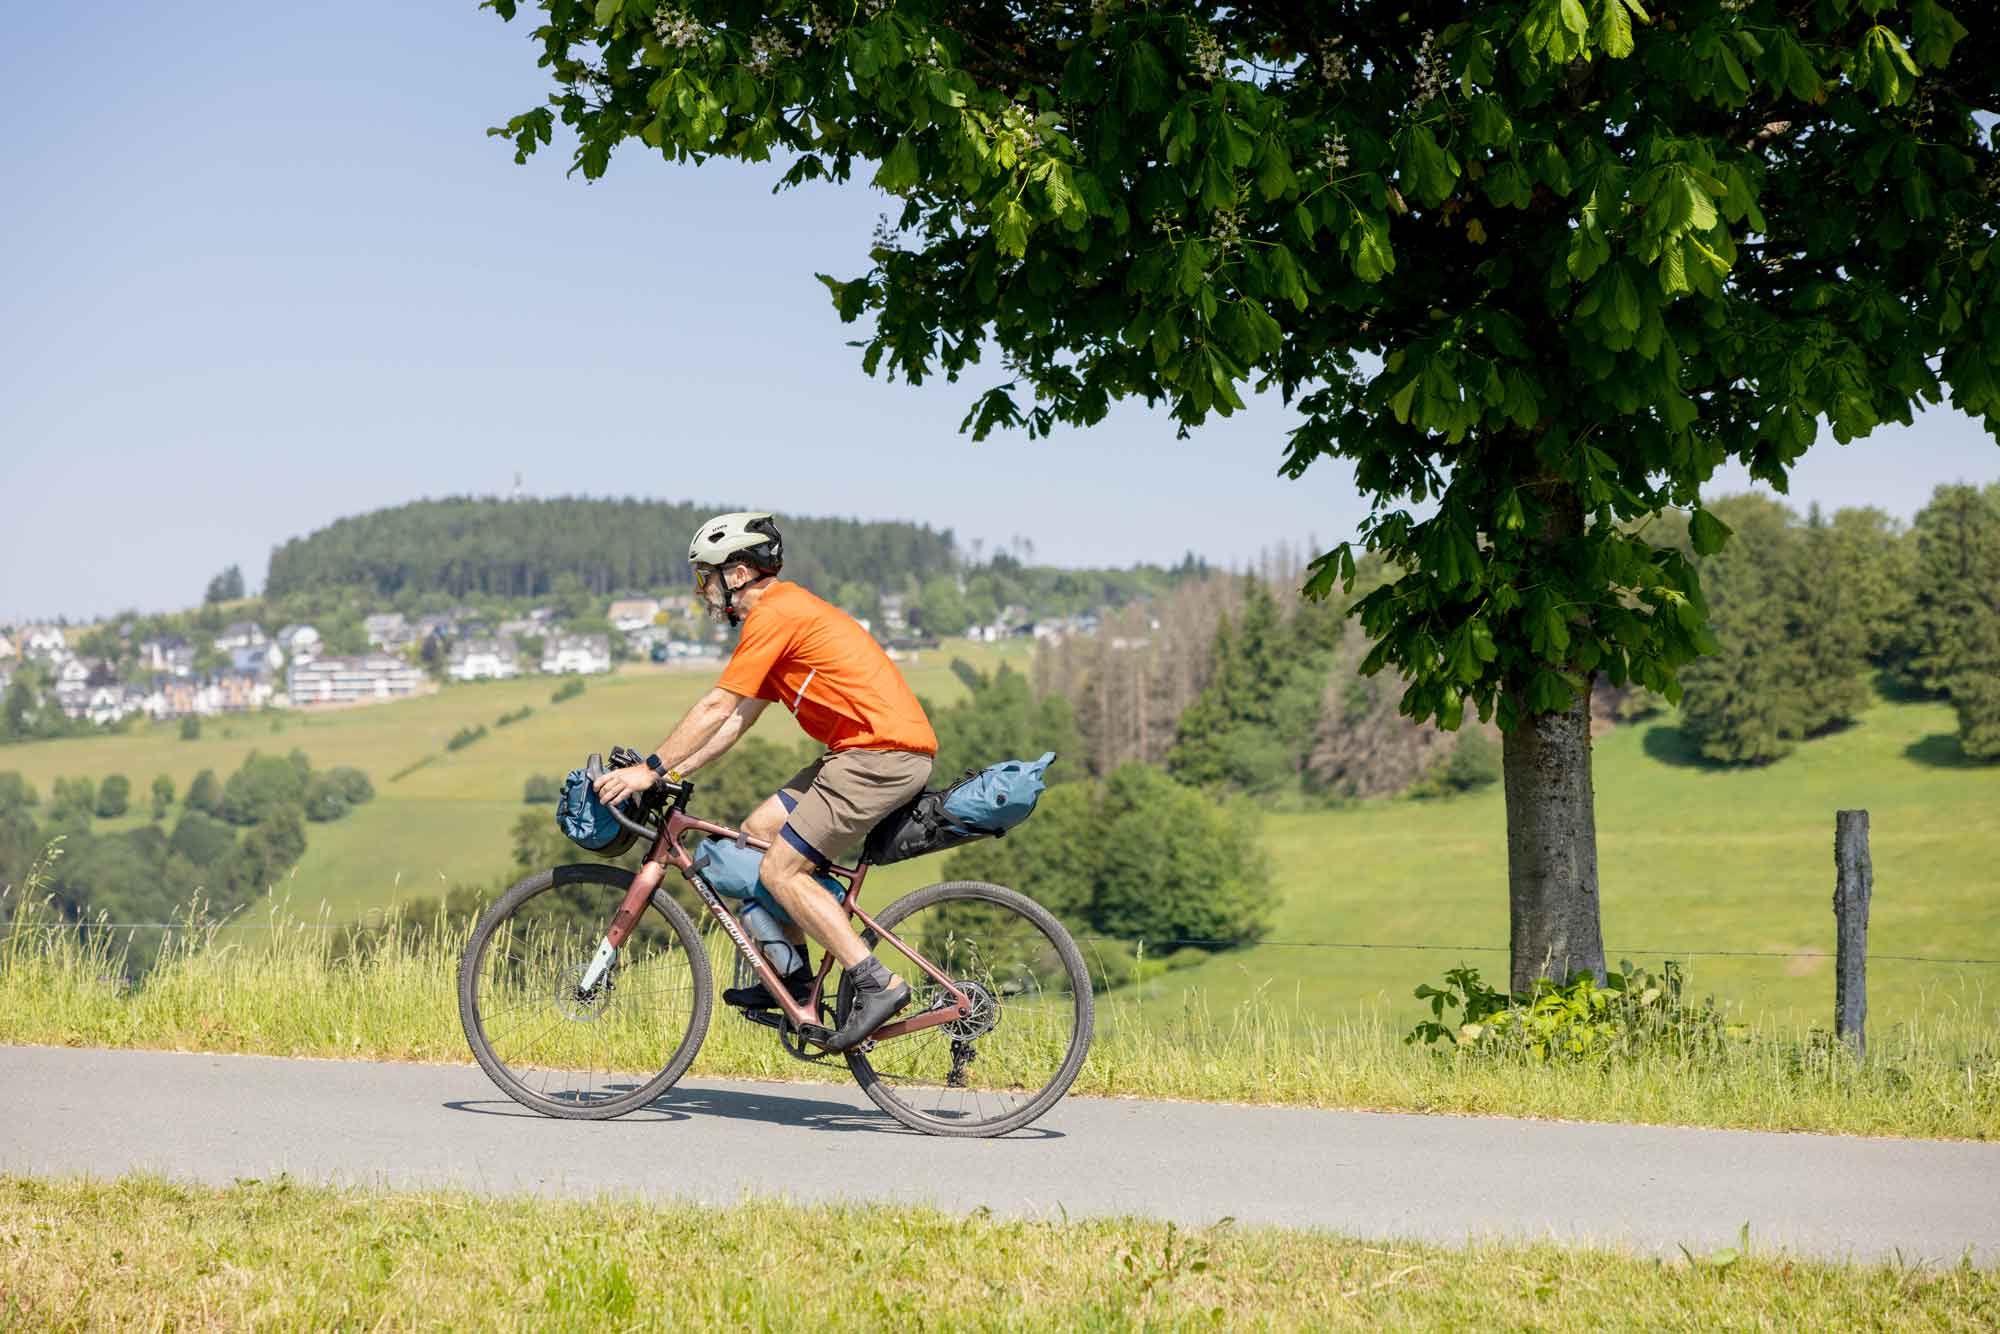 The sauerland is a great place for our deuter bikepacking bag test!